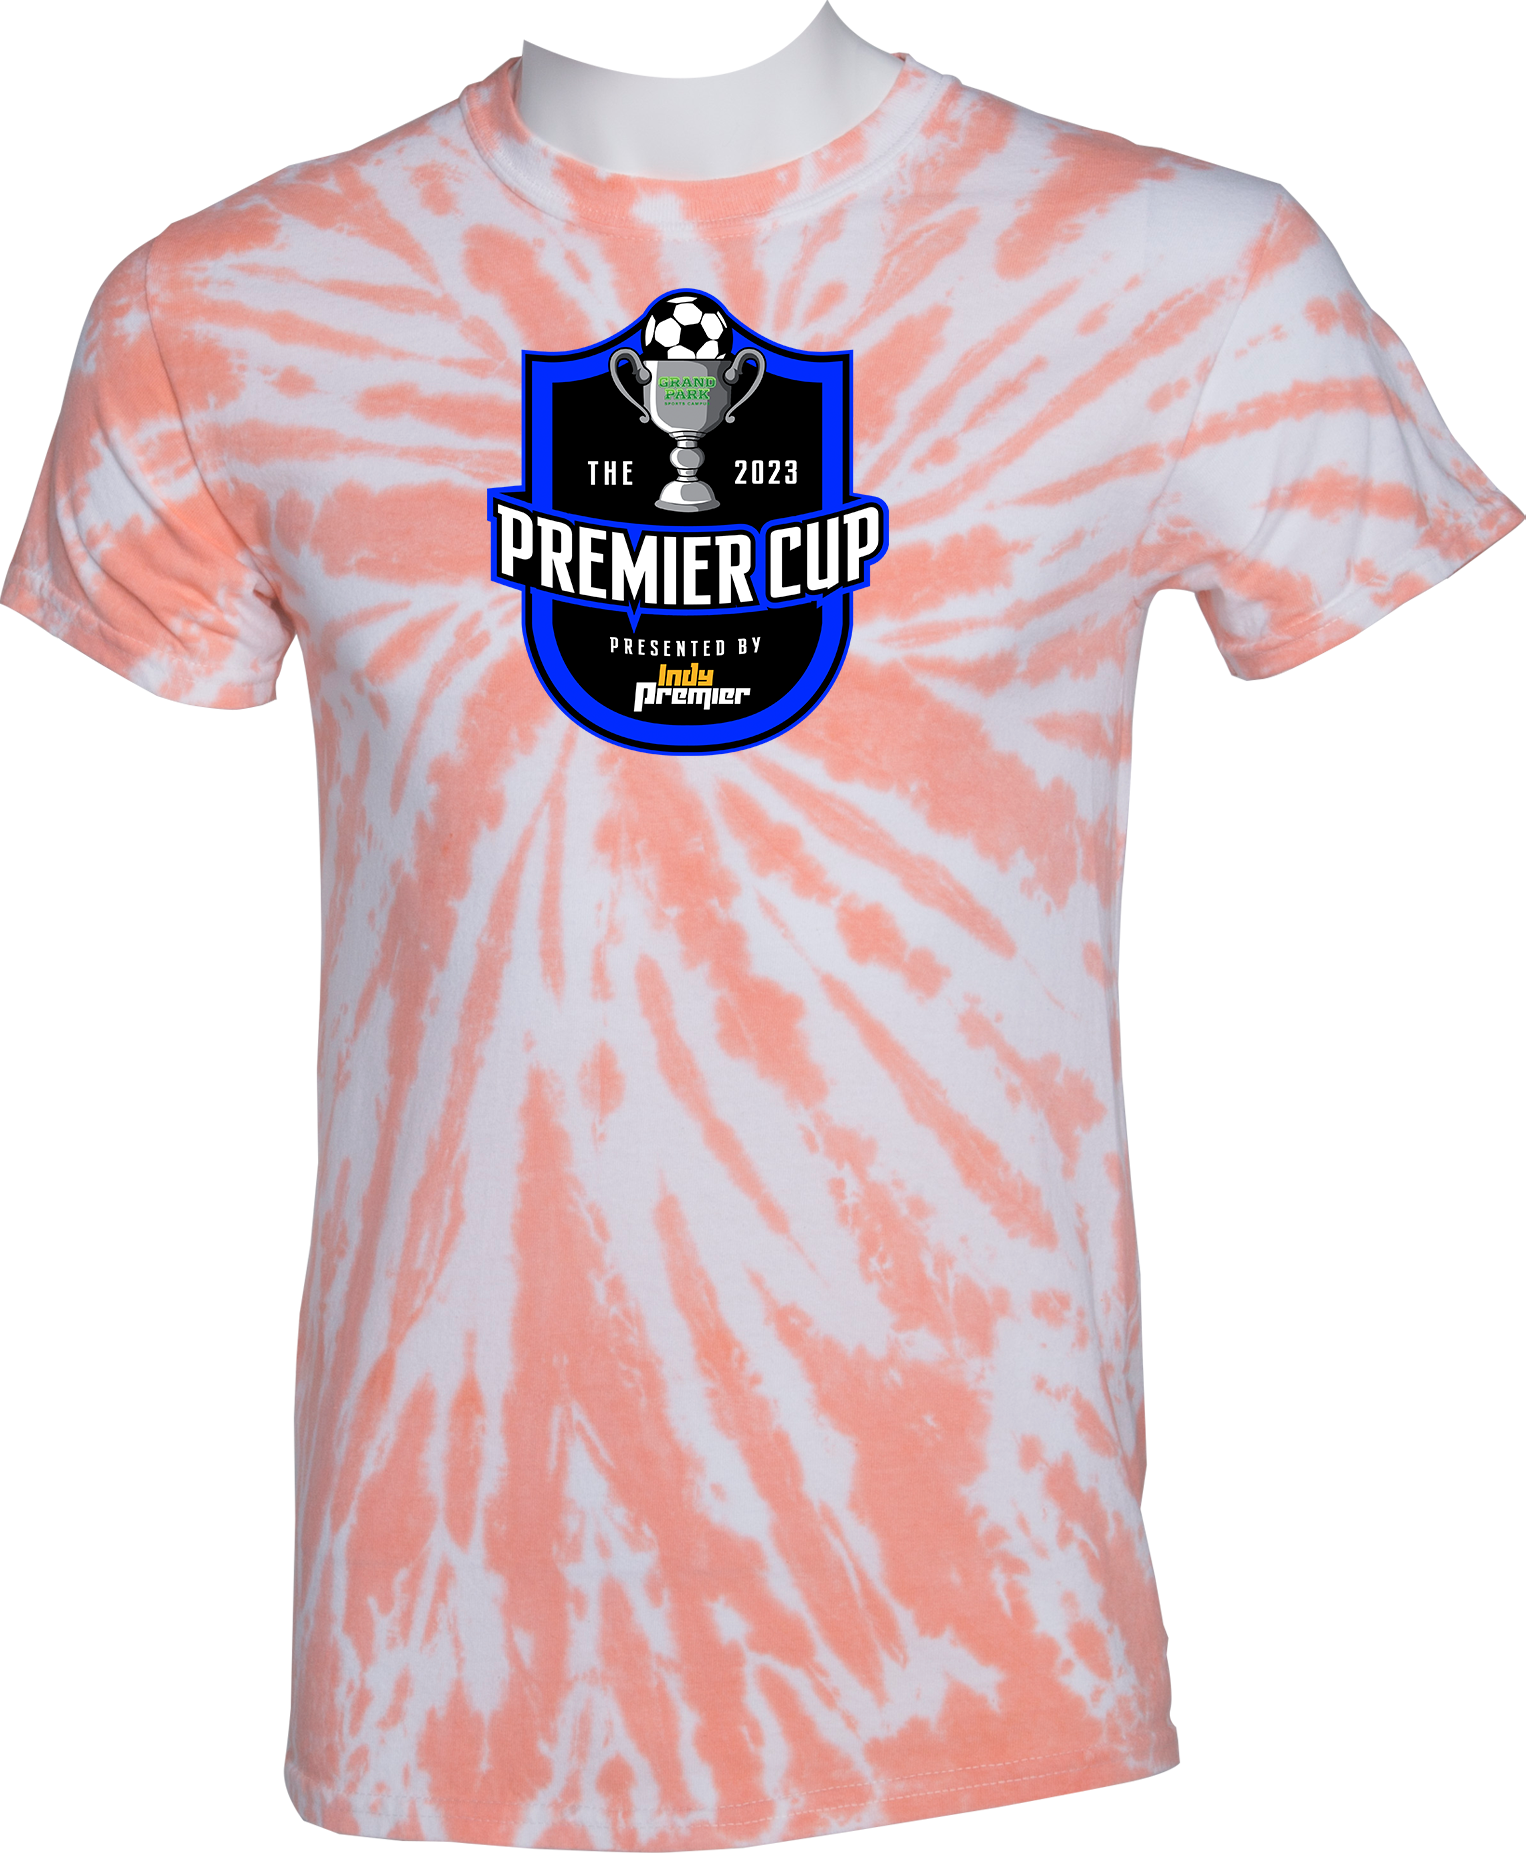 TIE-DYE SHORT SLEEVES - 2023 The Premier Cup presented by Indy Premier